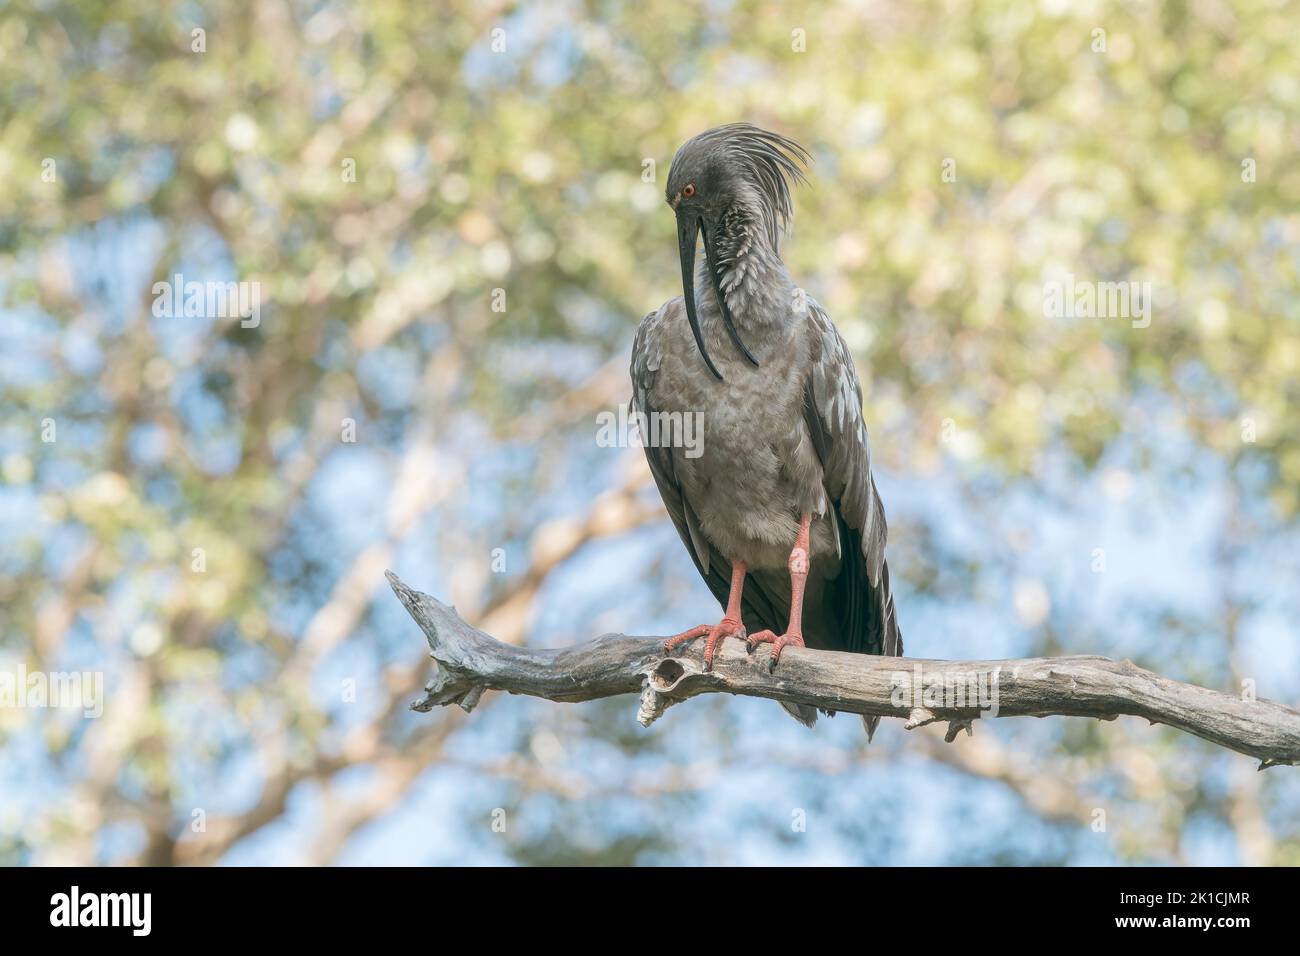 plumbeous ibis, Theristicus caerulescens, single adult preening while perched in tree, Pantanal, Barzil Stock Photo